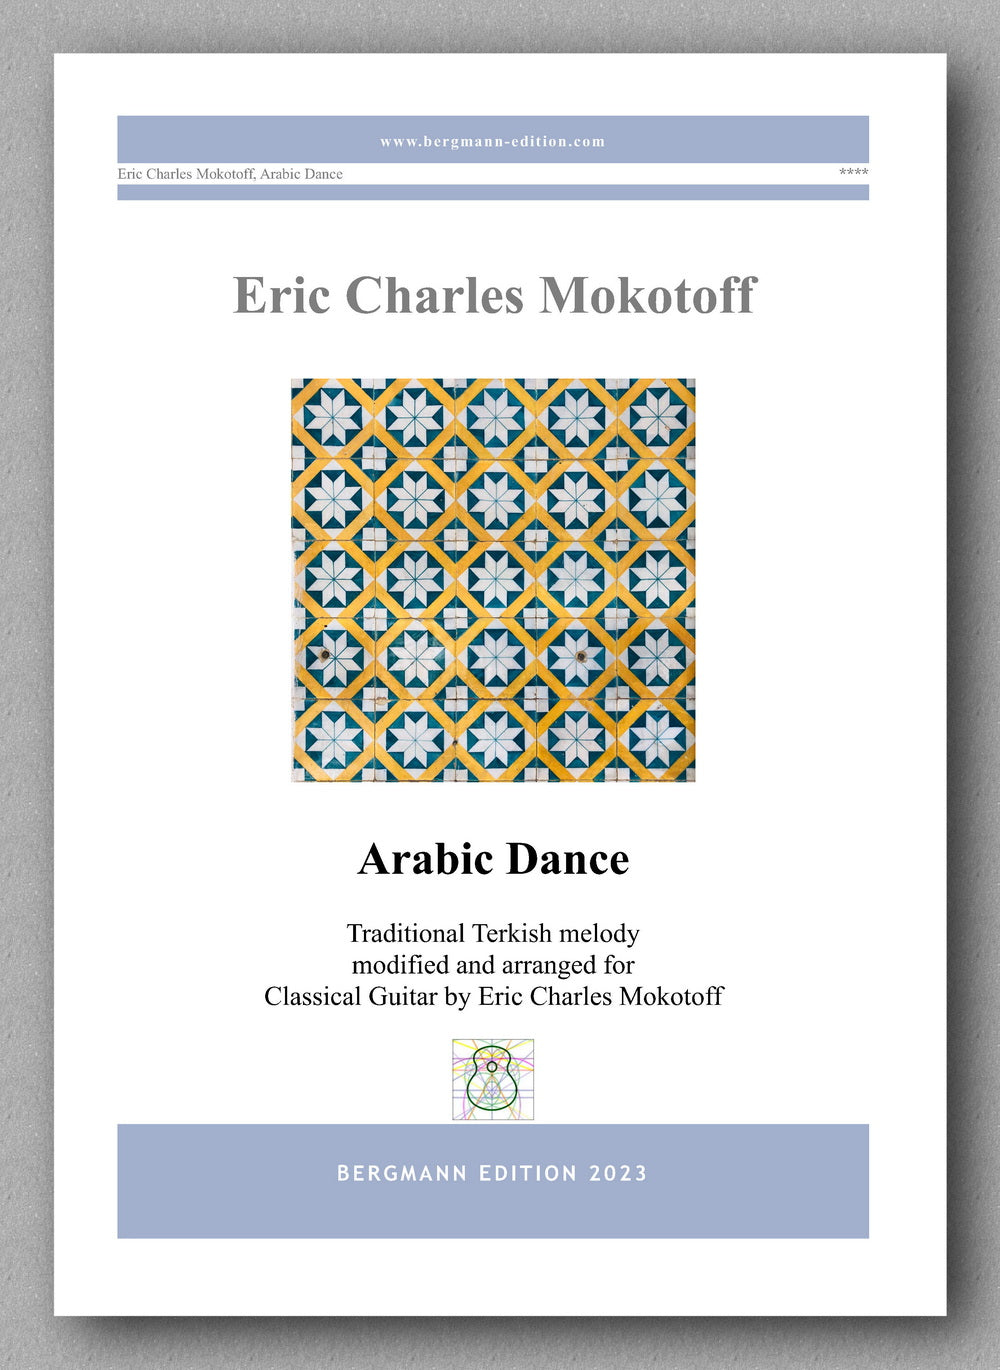 Arabic Dance, by Eric Charles Mokotoff - preview of the cover